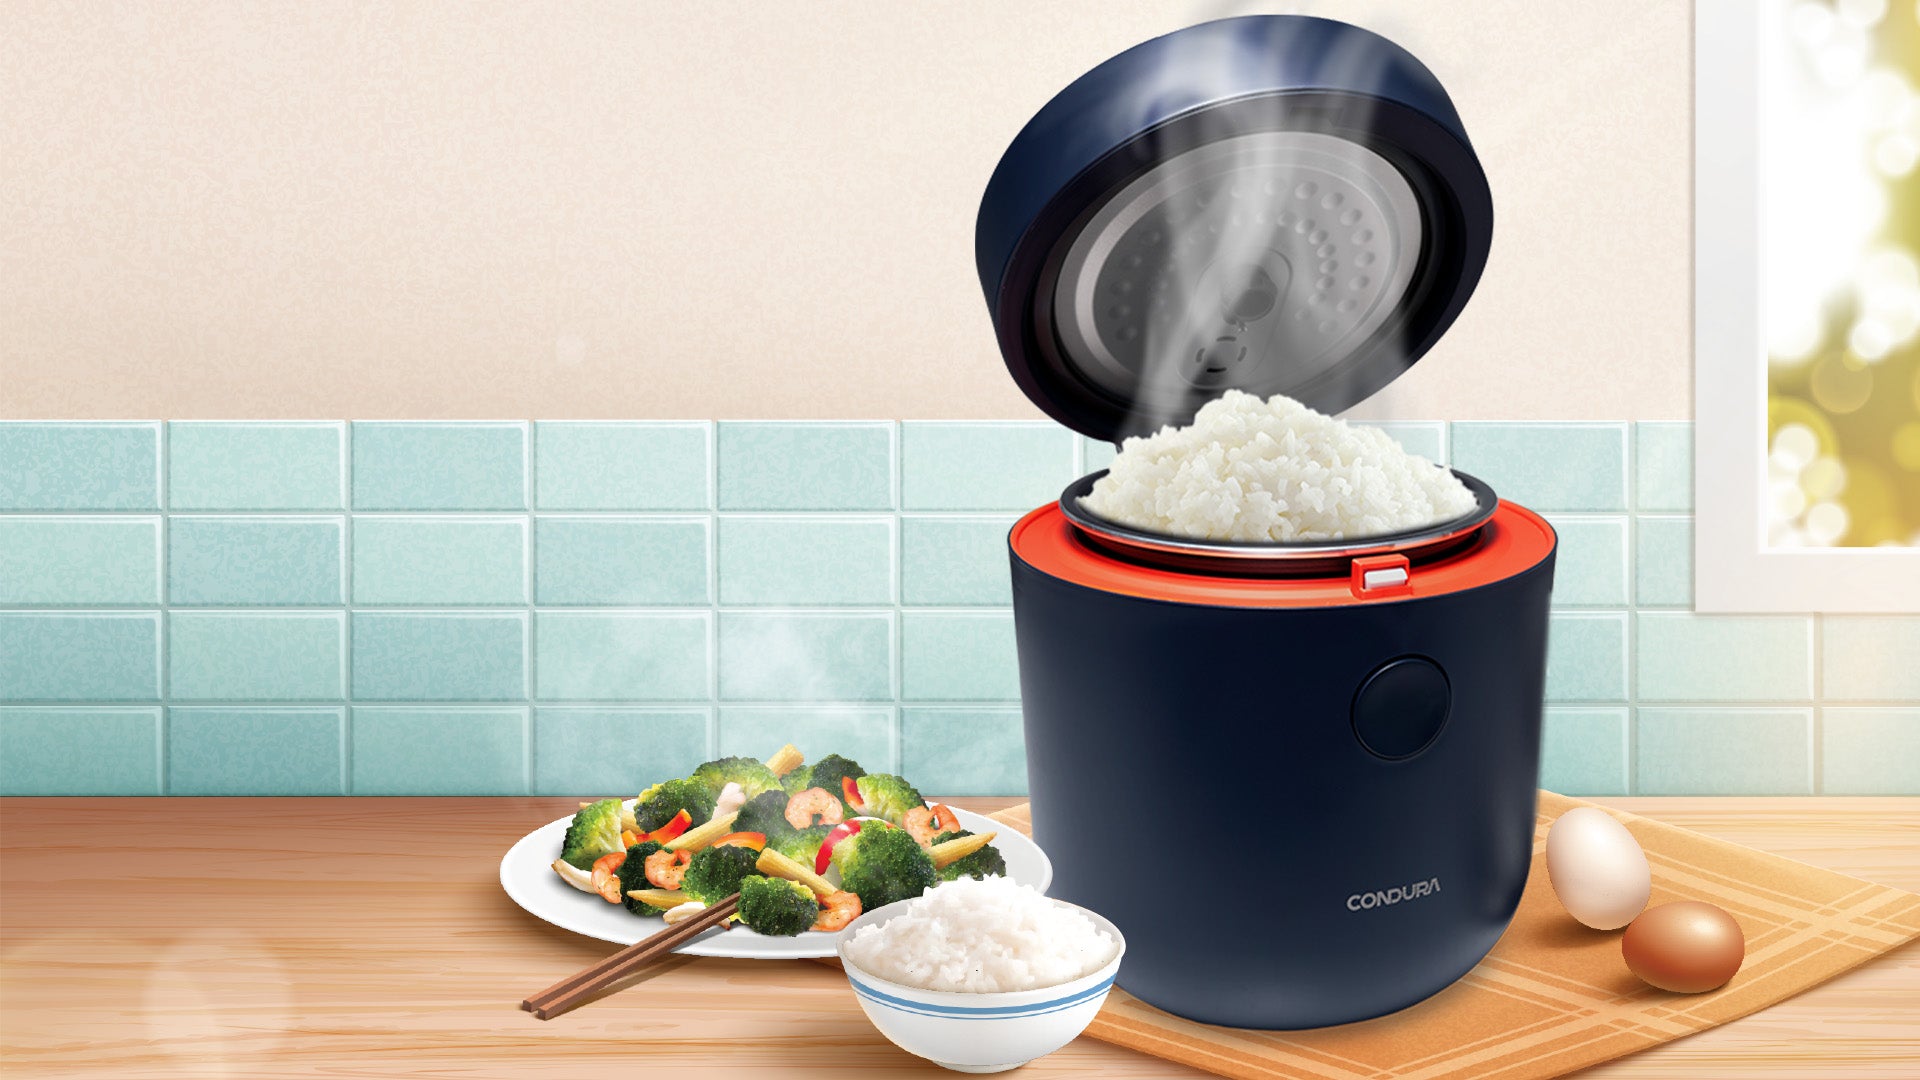 https://concepstore.ph/collections/condura-appliances/products/low-carb-rice-cooker